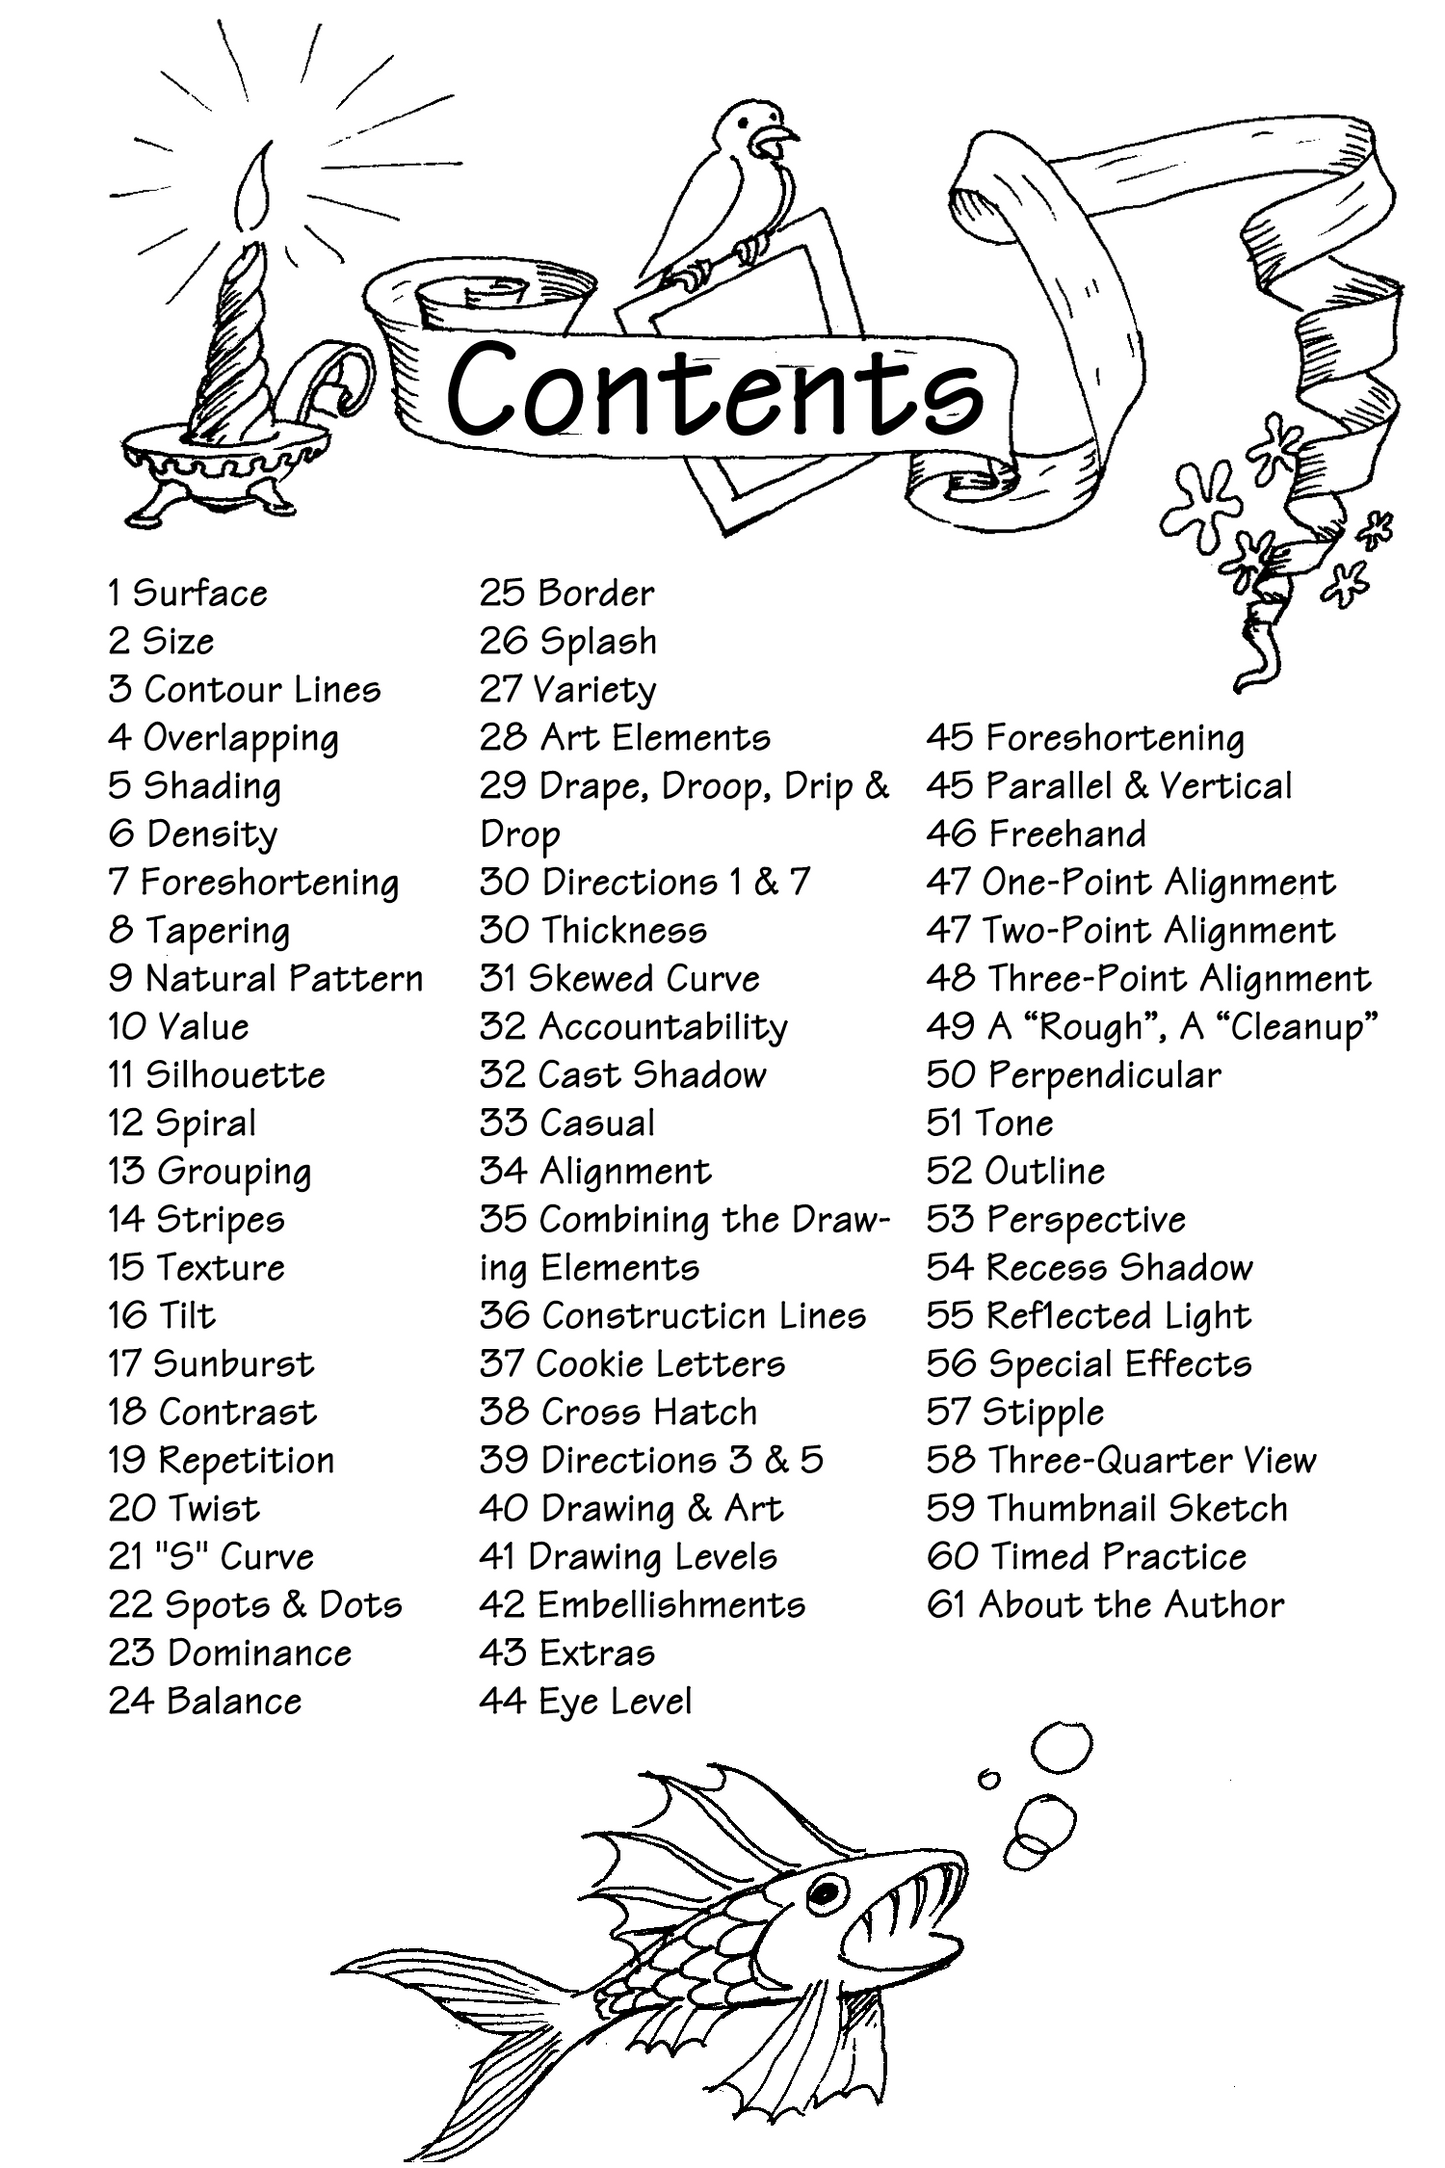 Table of Contents from the book Art Elements by Bruce McIntyre